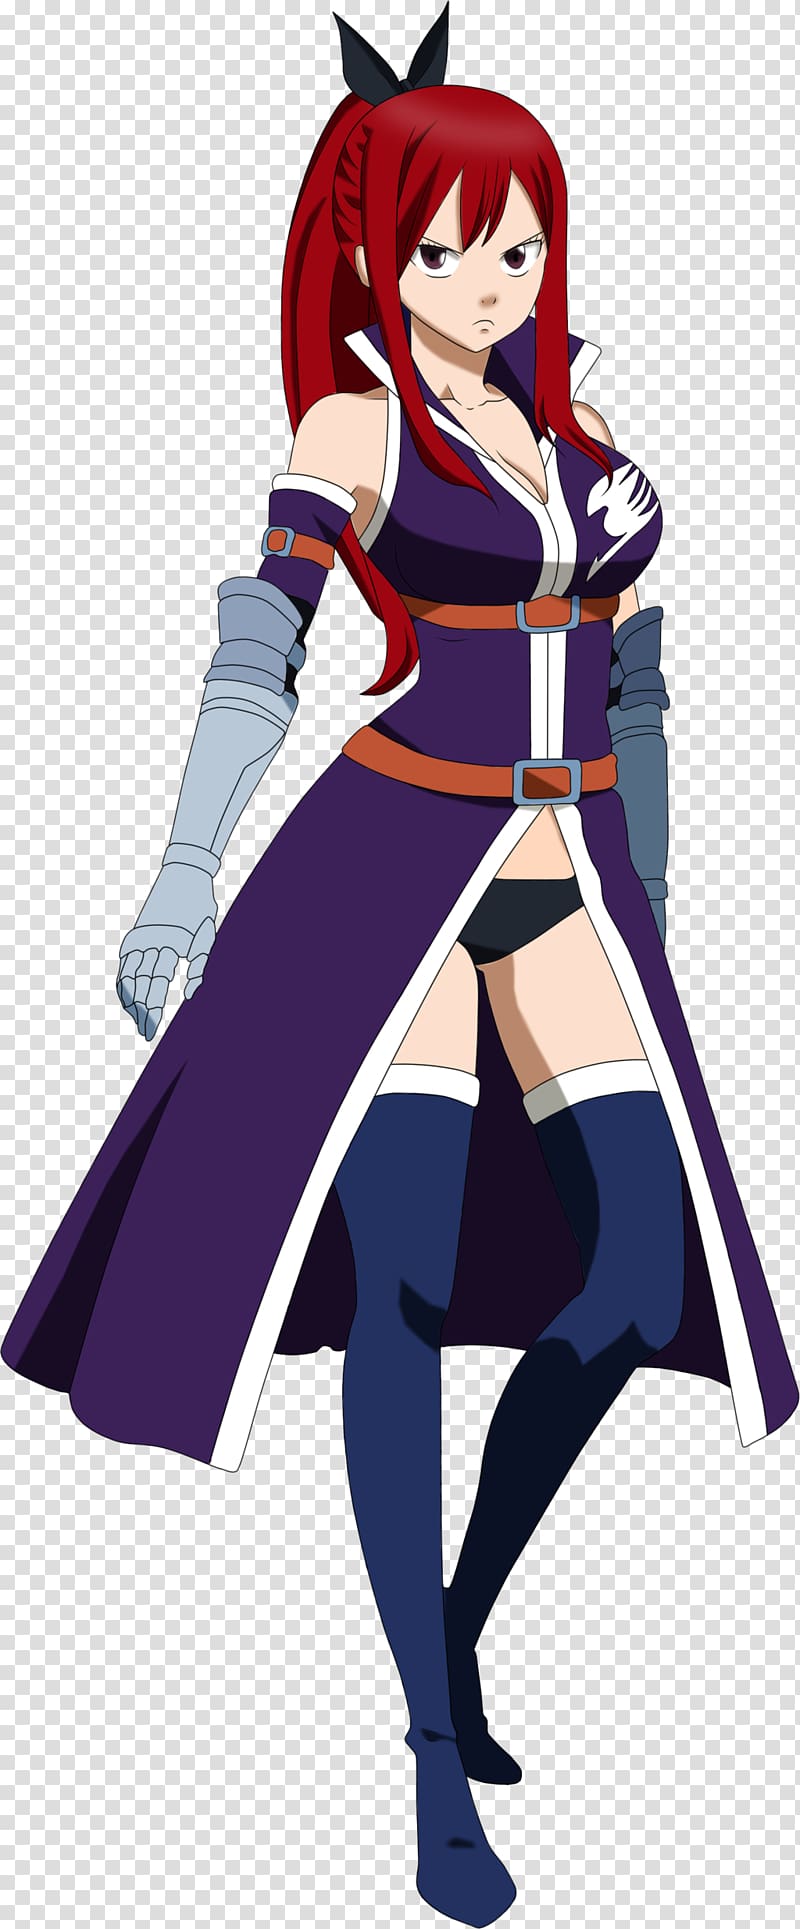 Erza Scarlet Natsu Dragneel Gray Fullbuster Juvia Lockser Fairy Tail, fairy tail transparent background PNG clipart